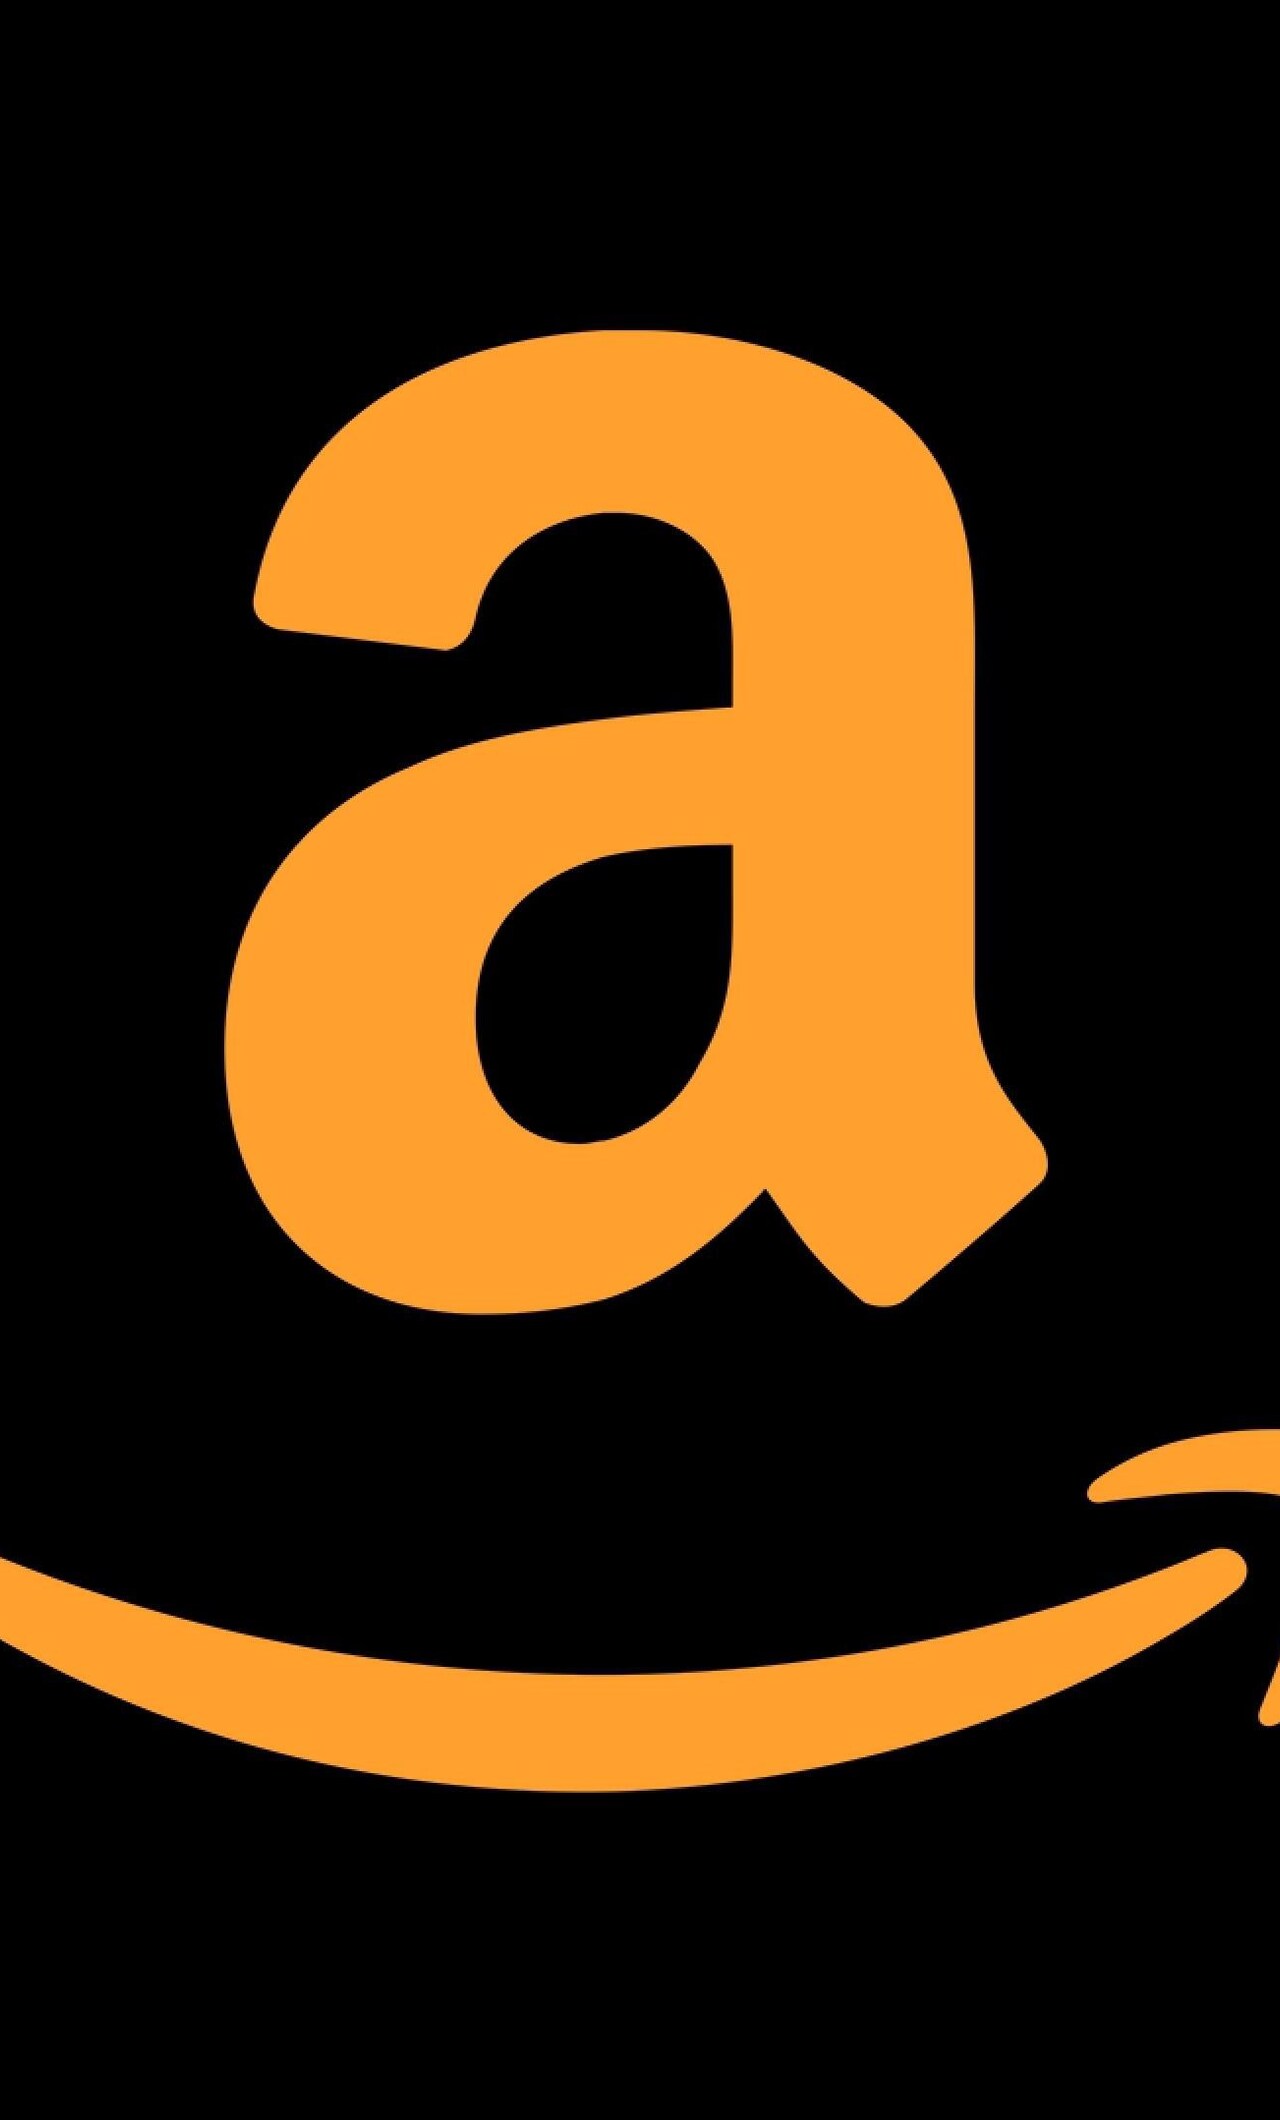 1280x21 Amazon 4k Logo Iphone 6 Hd 4k Wallpapers Images Backgrounds Photos And Pictures